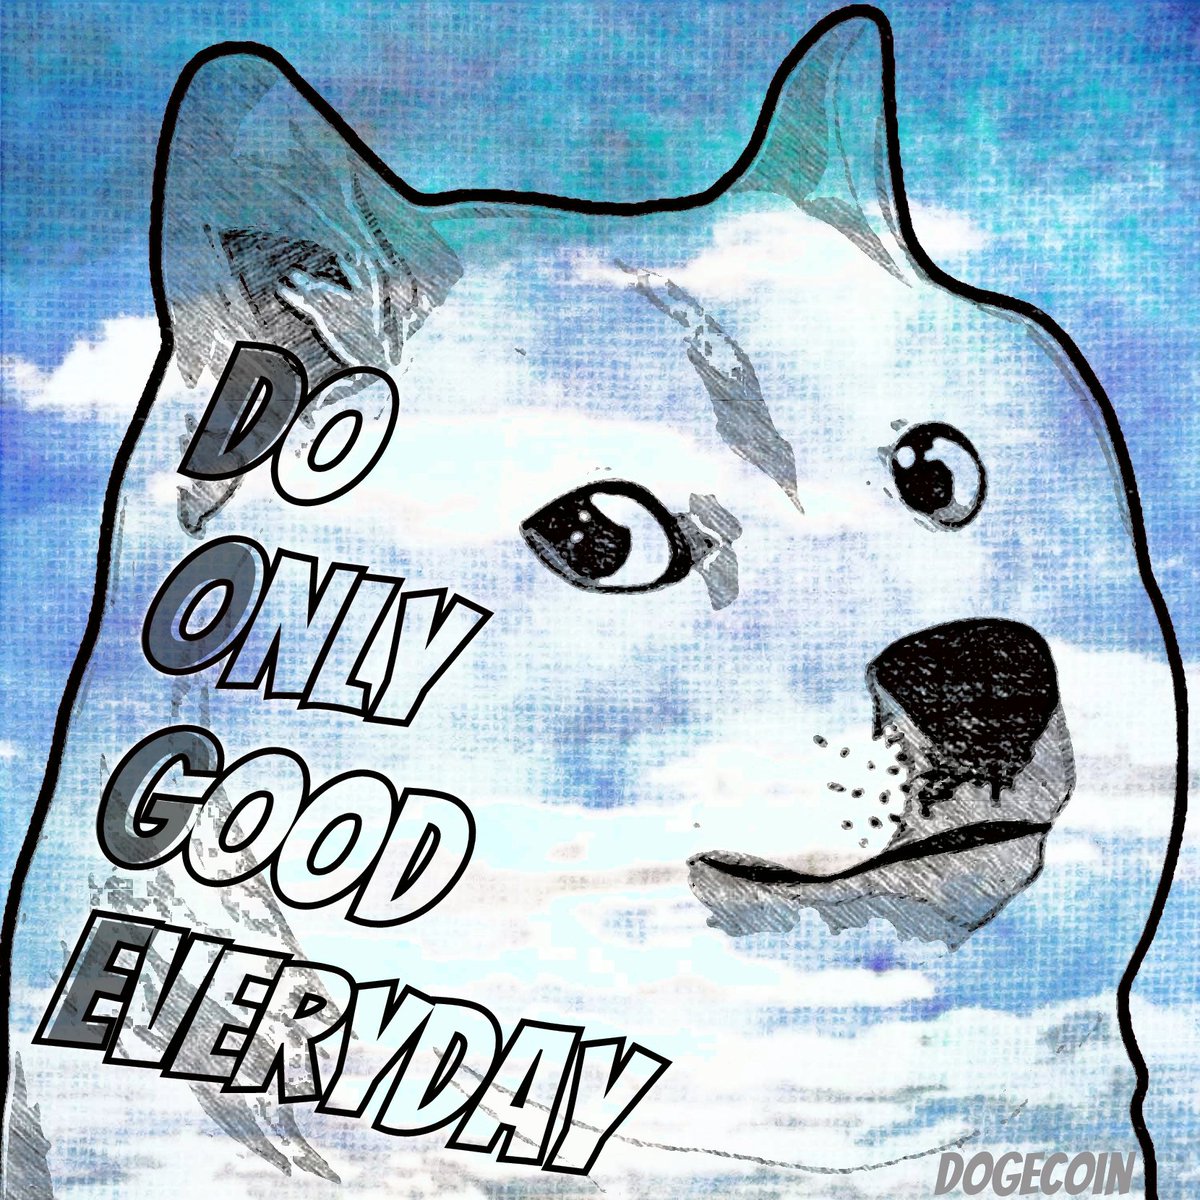 Do Only Good Everyday ✌️💙
#DoOnlyGoodEveryday 
#Dogecoin #Ðogecoin $Doge